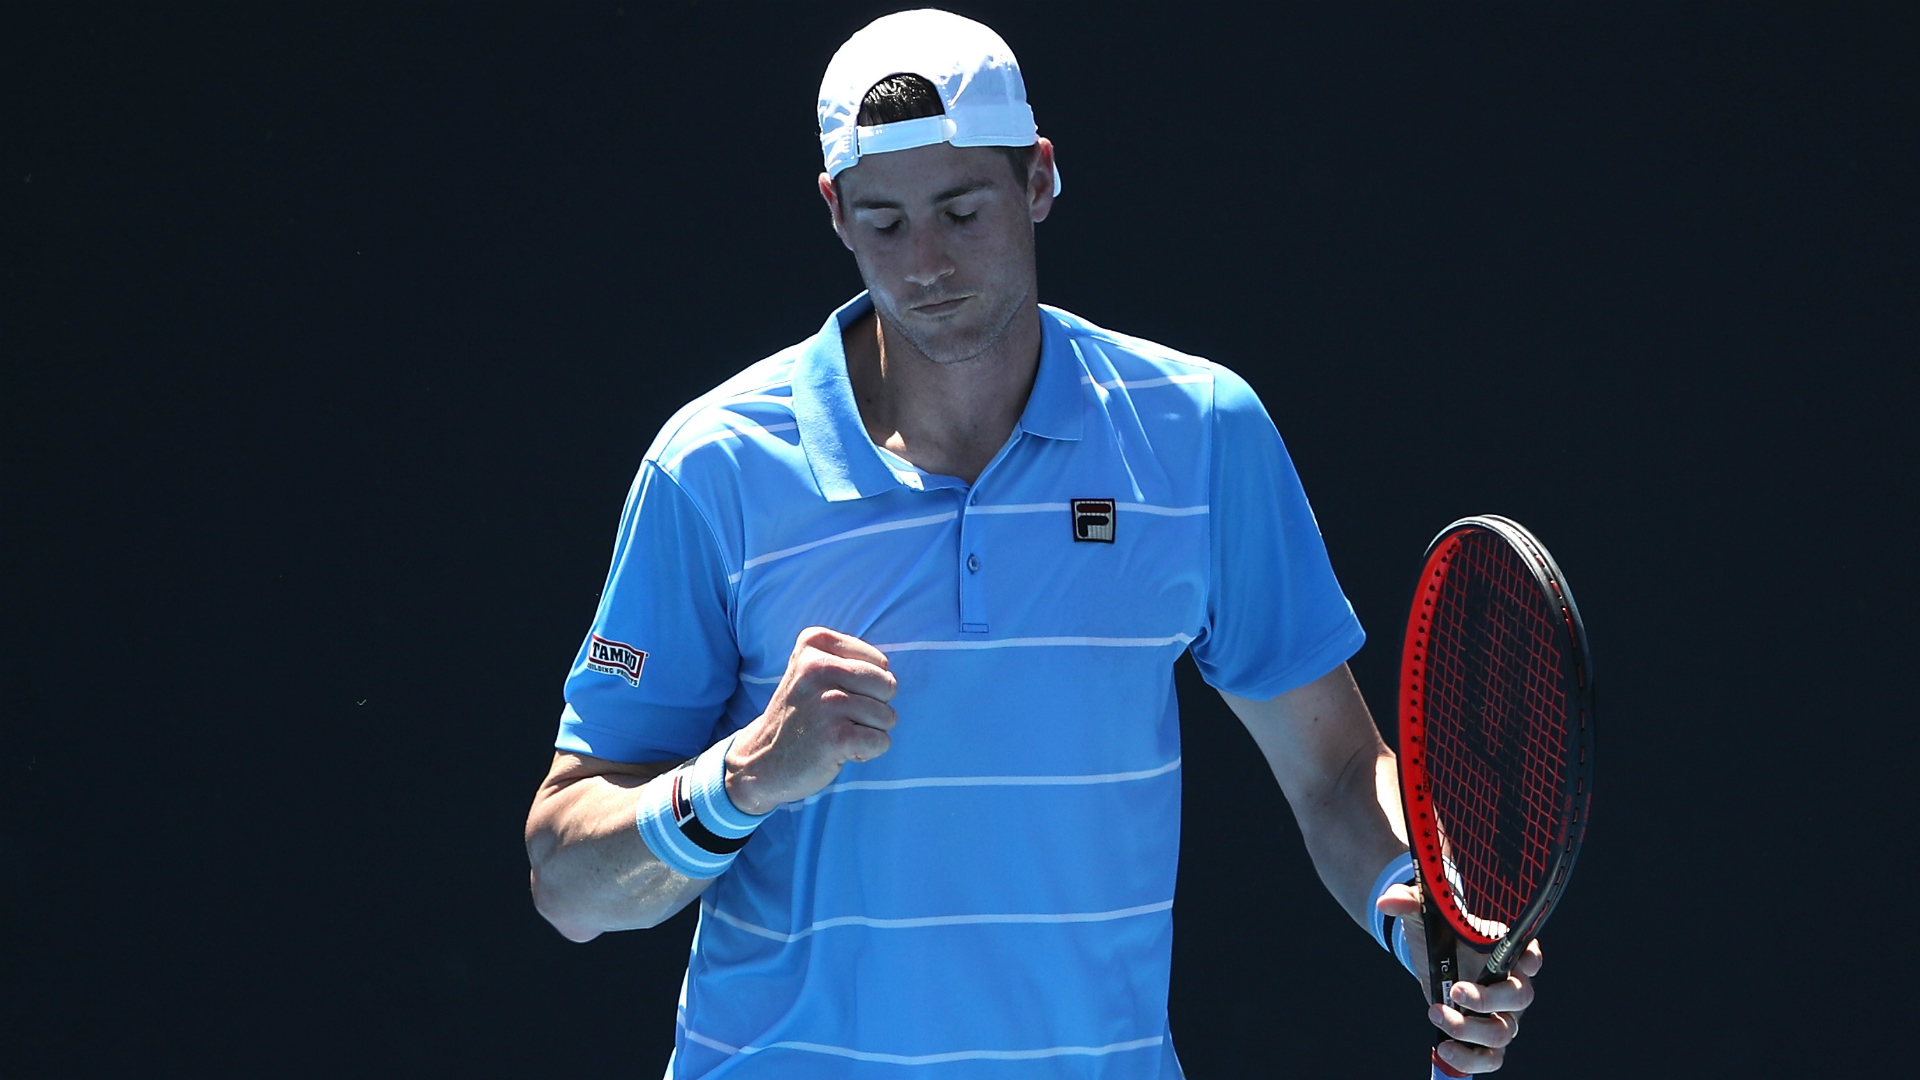 Top seed John Isner defeated Bernard Tomic en route to the New York Open quarter-finals, having lost his first two matches of 2019.